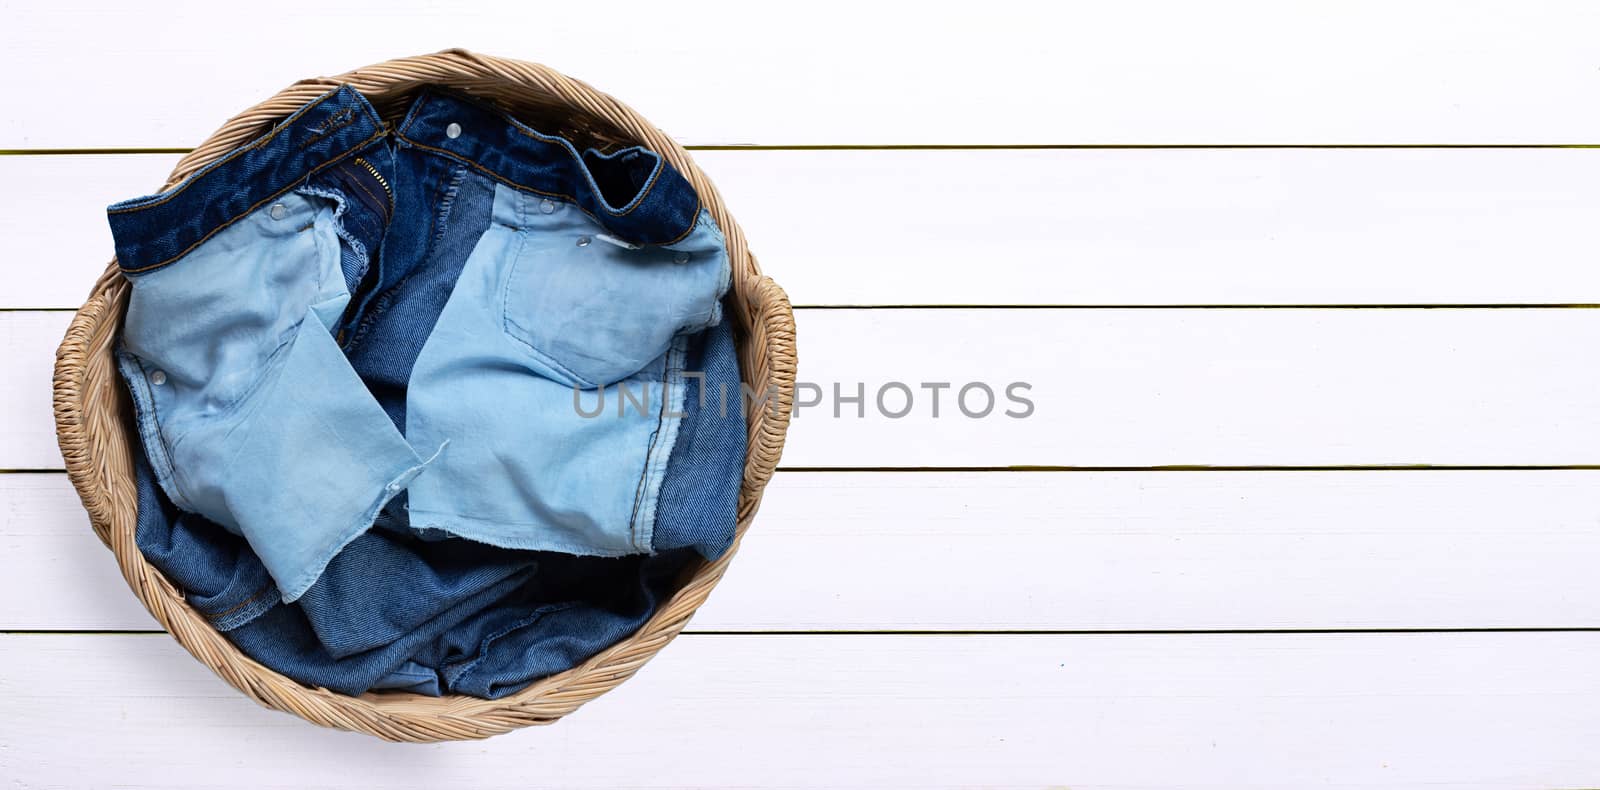 Jeans in laundry basket on white wooden background. Copy space